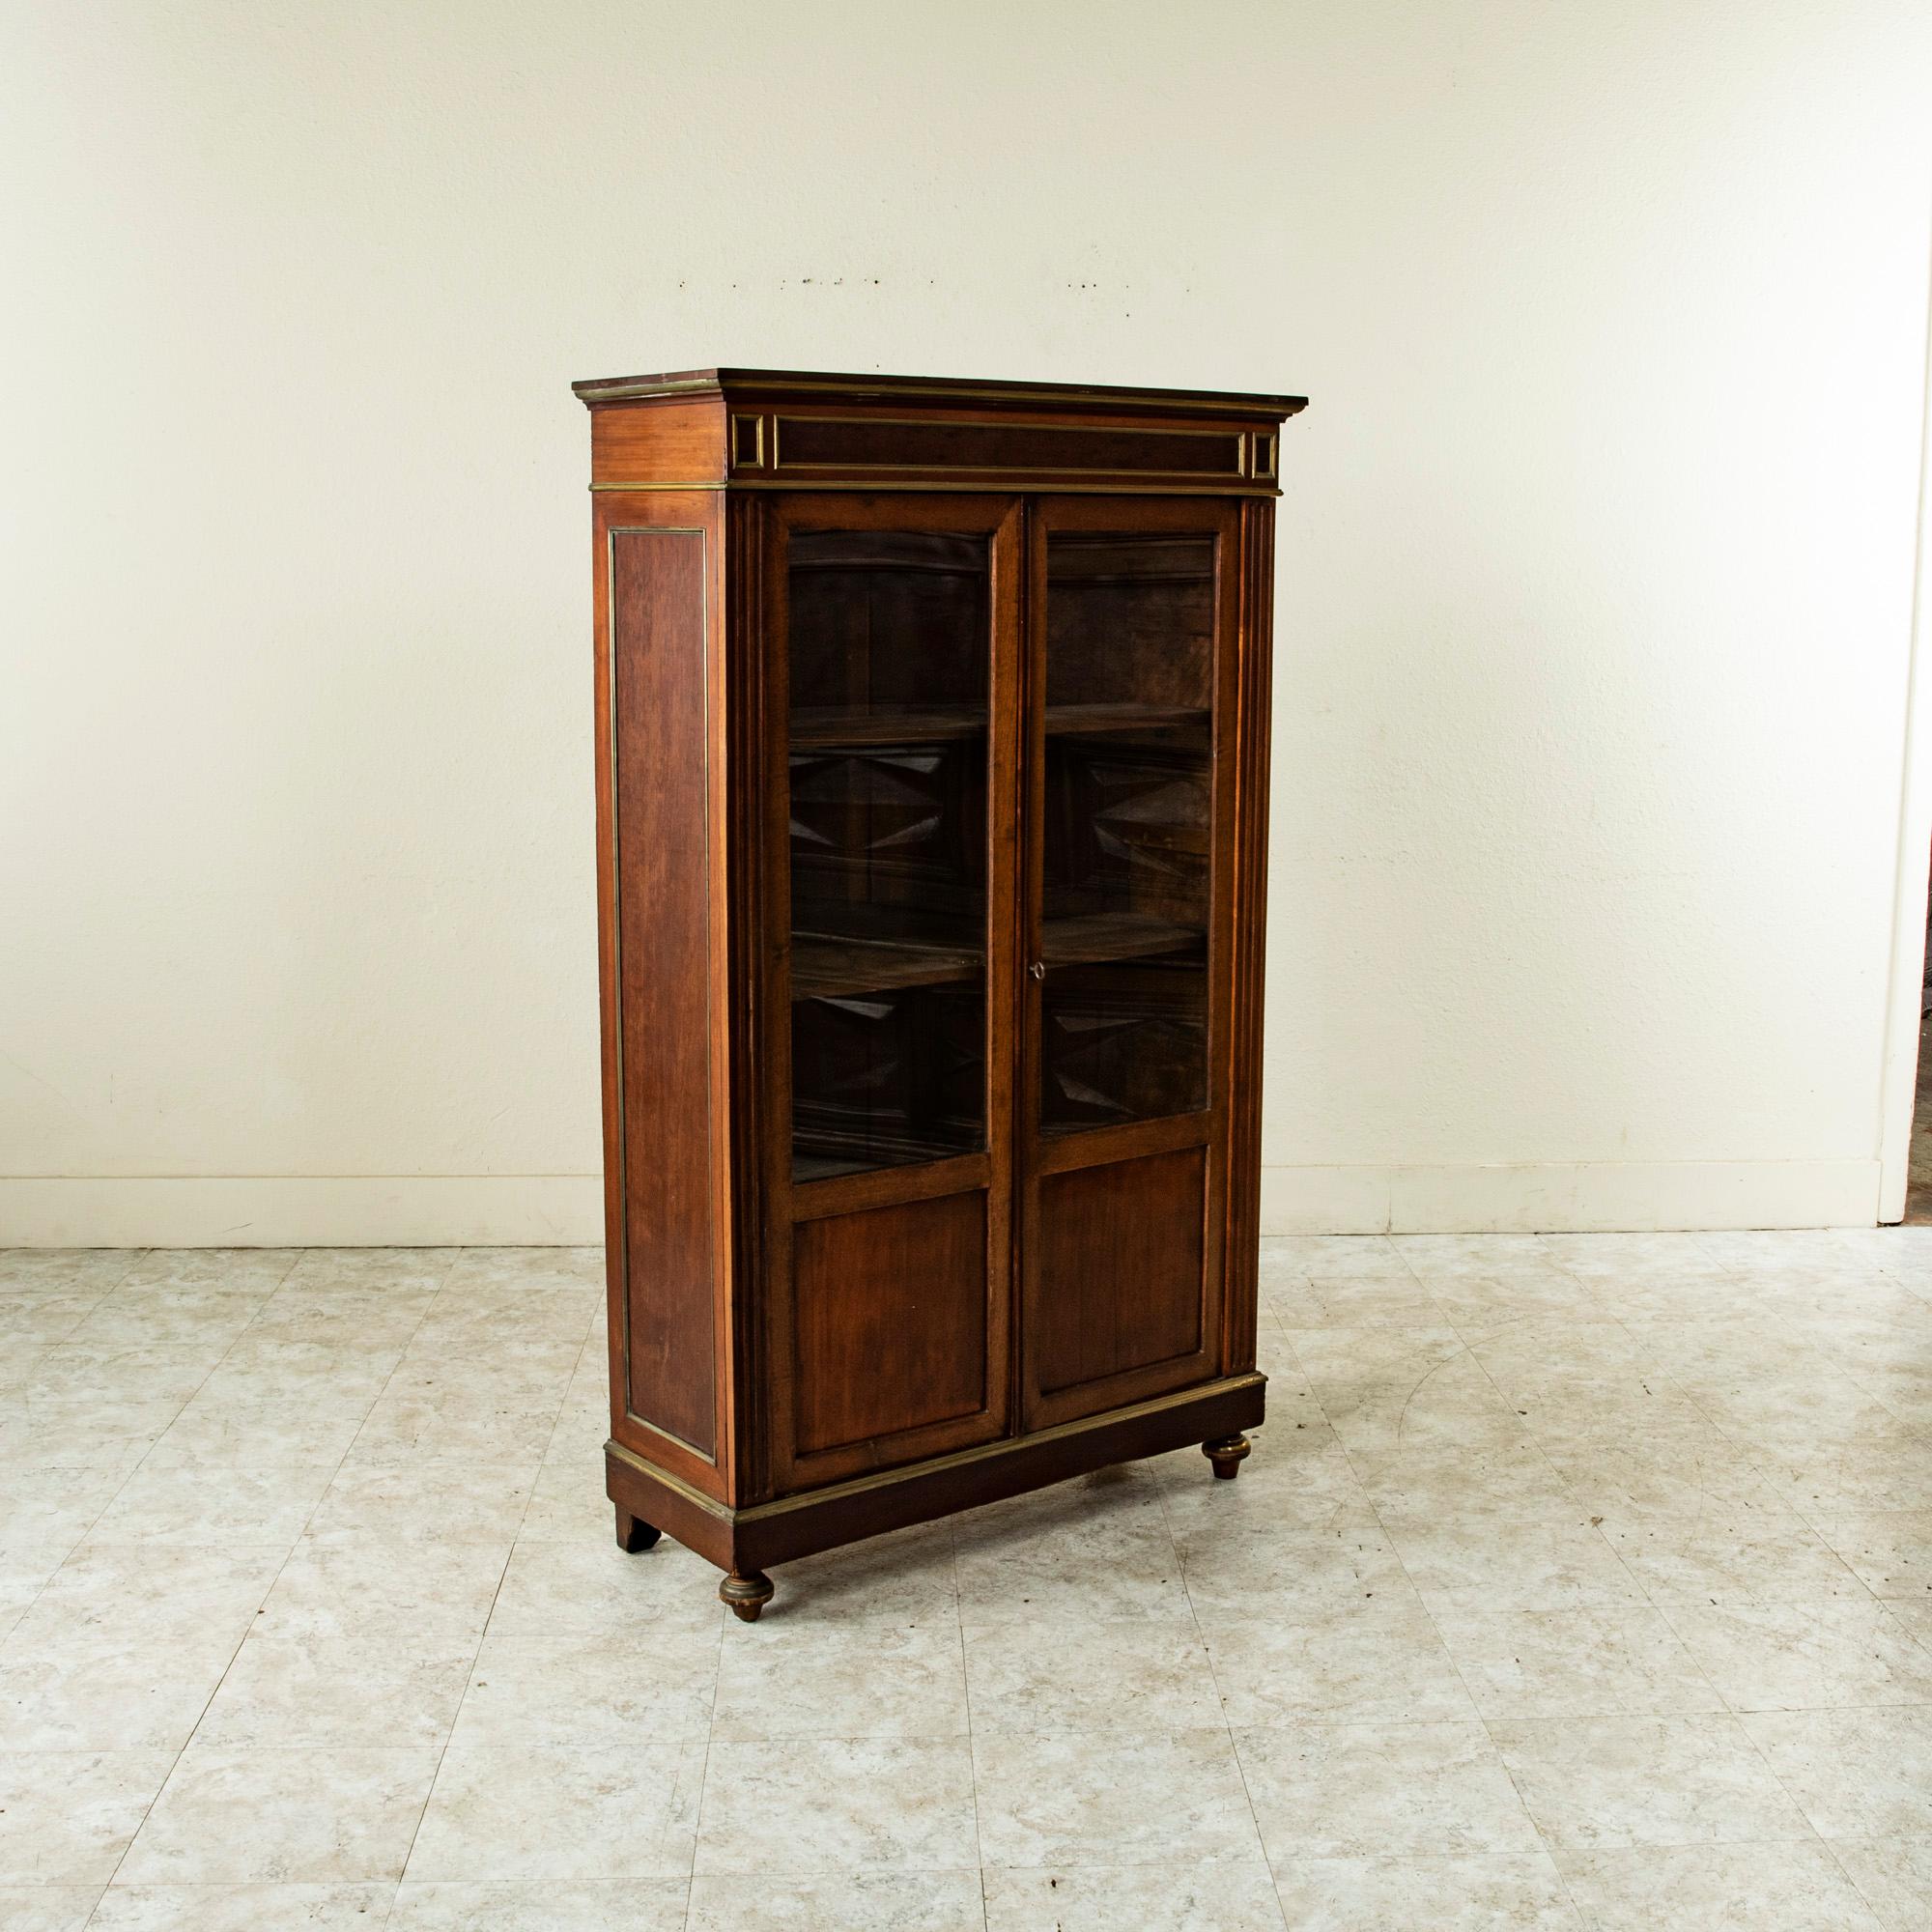 This small scale late 19th century French Louis XVI style mahogany bibliotheque or bookcase is finished with bronze banding. Its corners feature fluting and the side panels are also inset with bronze banding. Its two doors open to reveal an interior